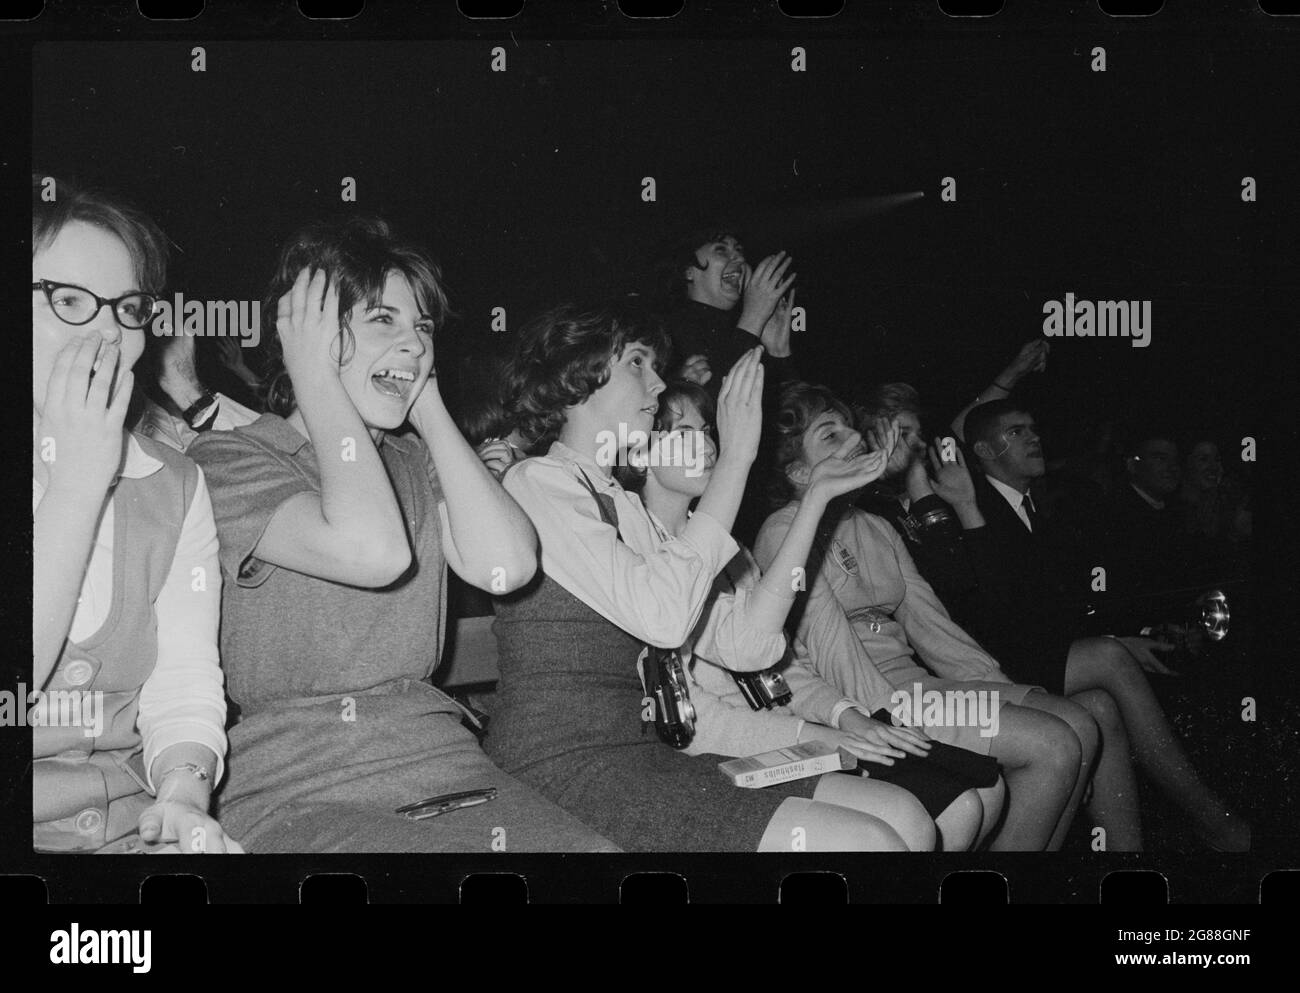 Beatles fans at the Washington Coliseum, February 11, 1964. Shouting and screaming women in the audience. Trikosko, Marion S., photographer. Stock Photo